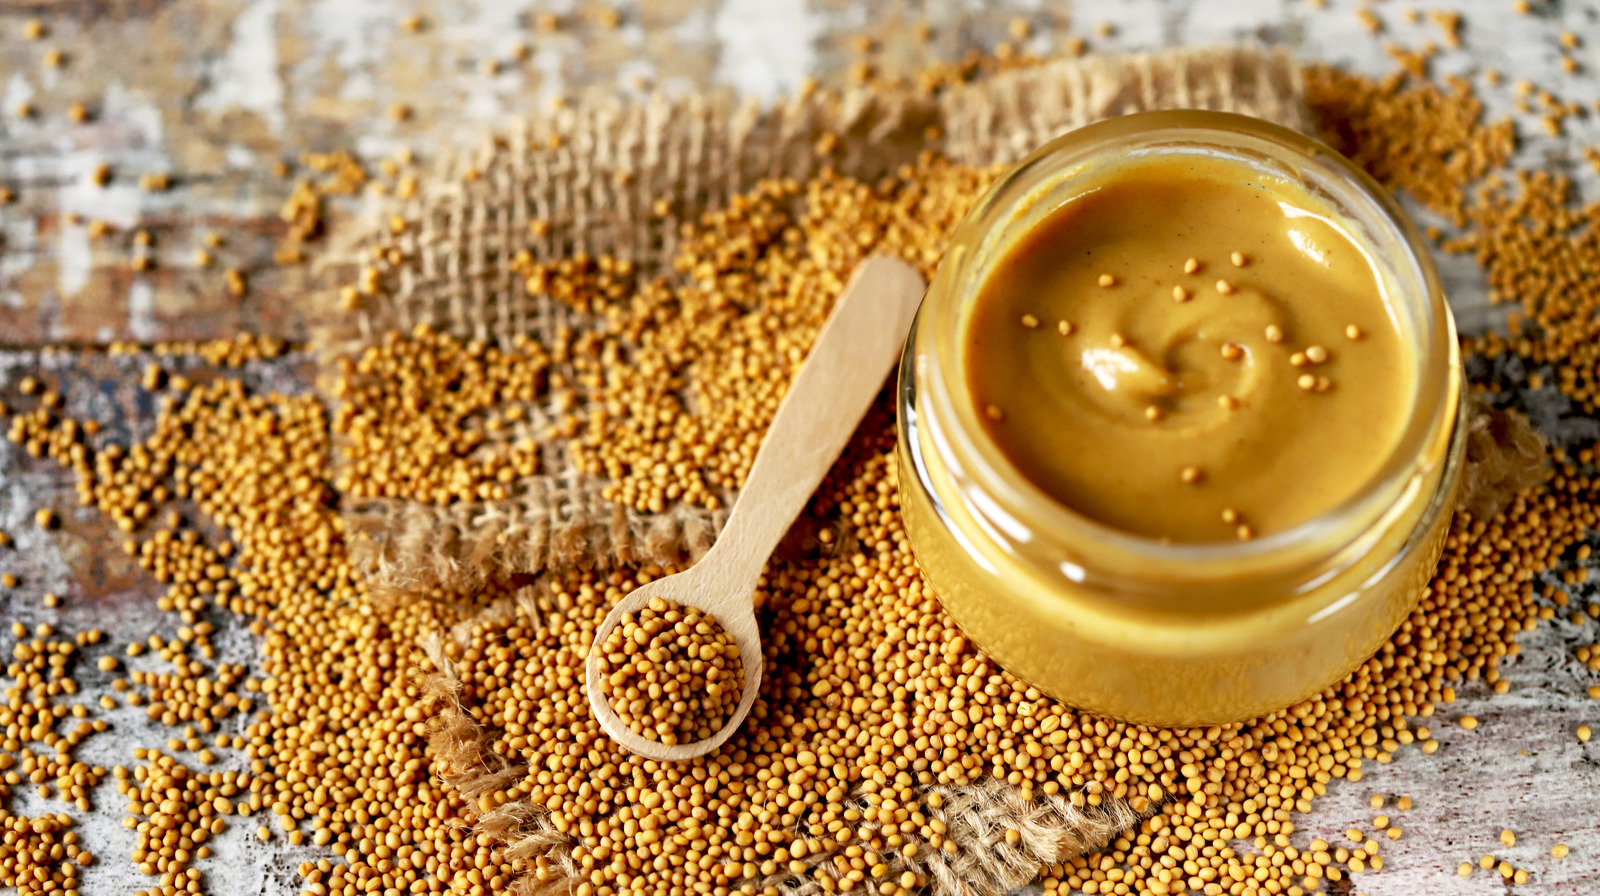 Your Dijon Mustard May Soon Be Even More Expensive